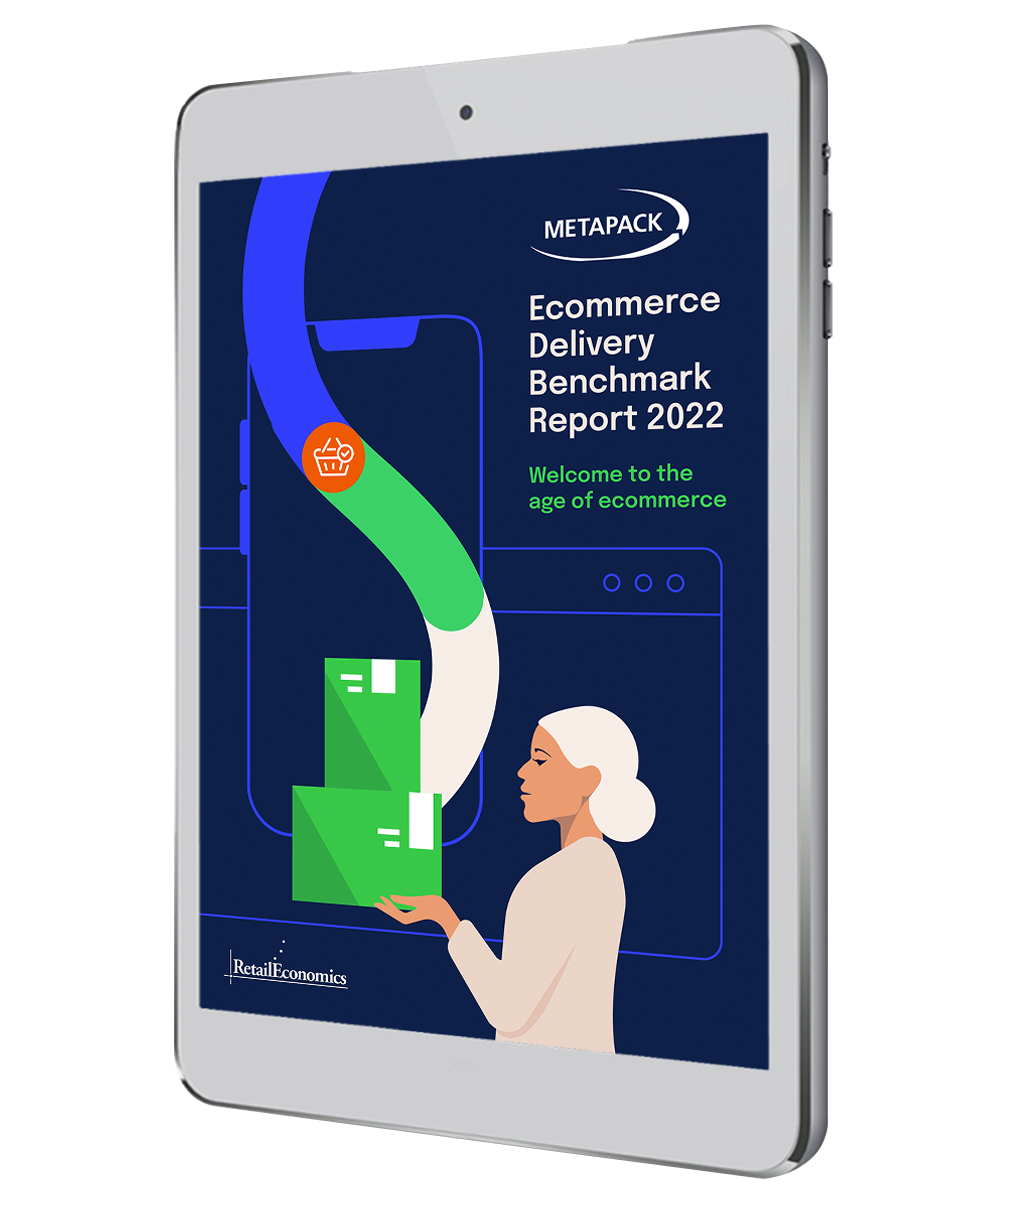 Ecommerce Delivery Benchmark Report 2022 (1)